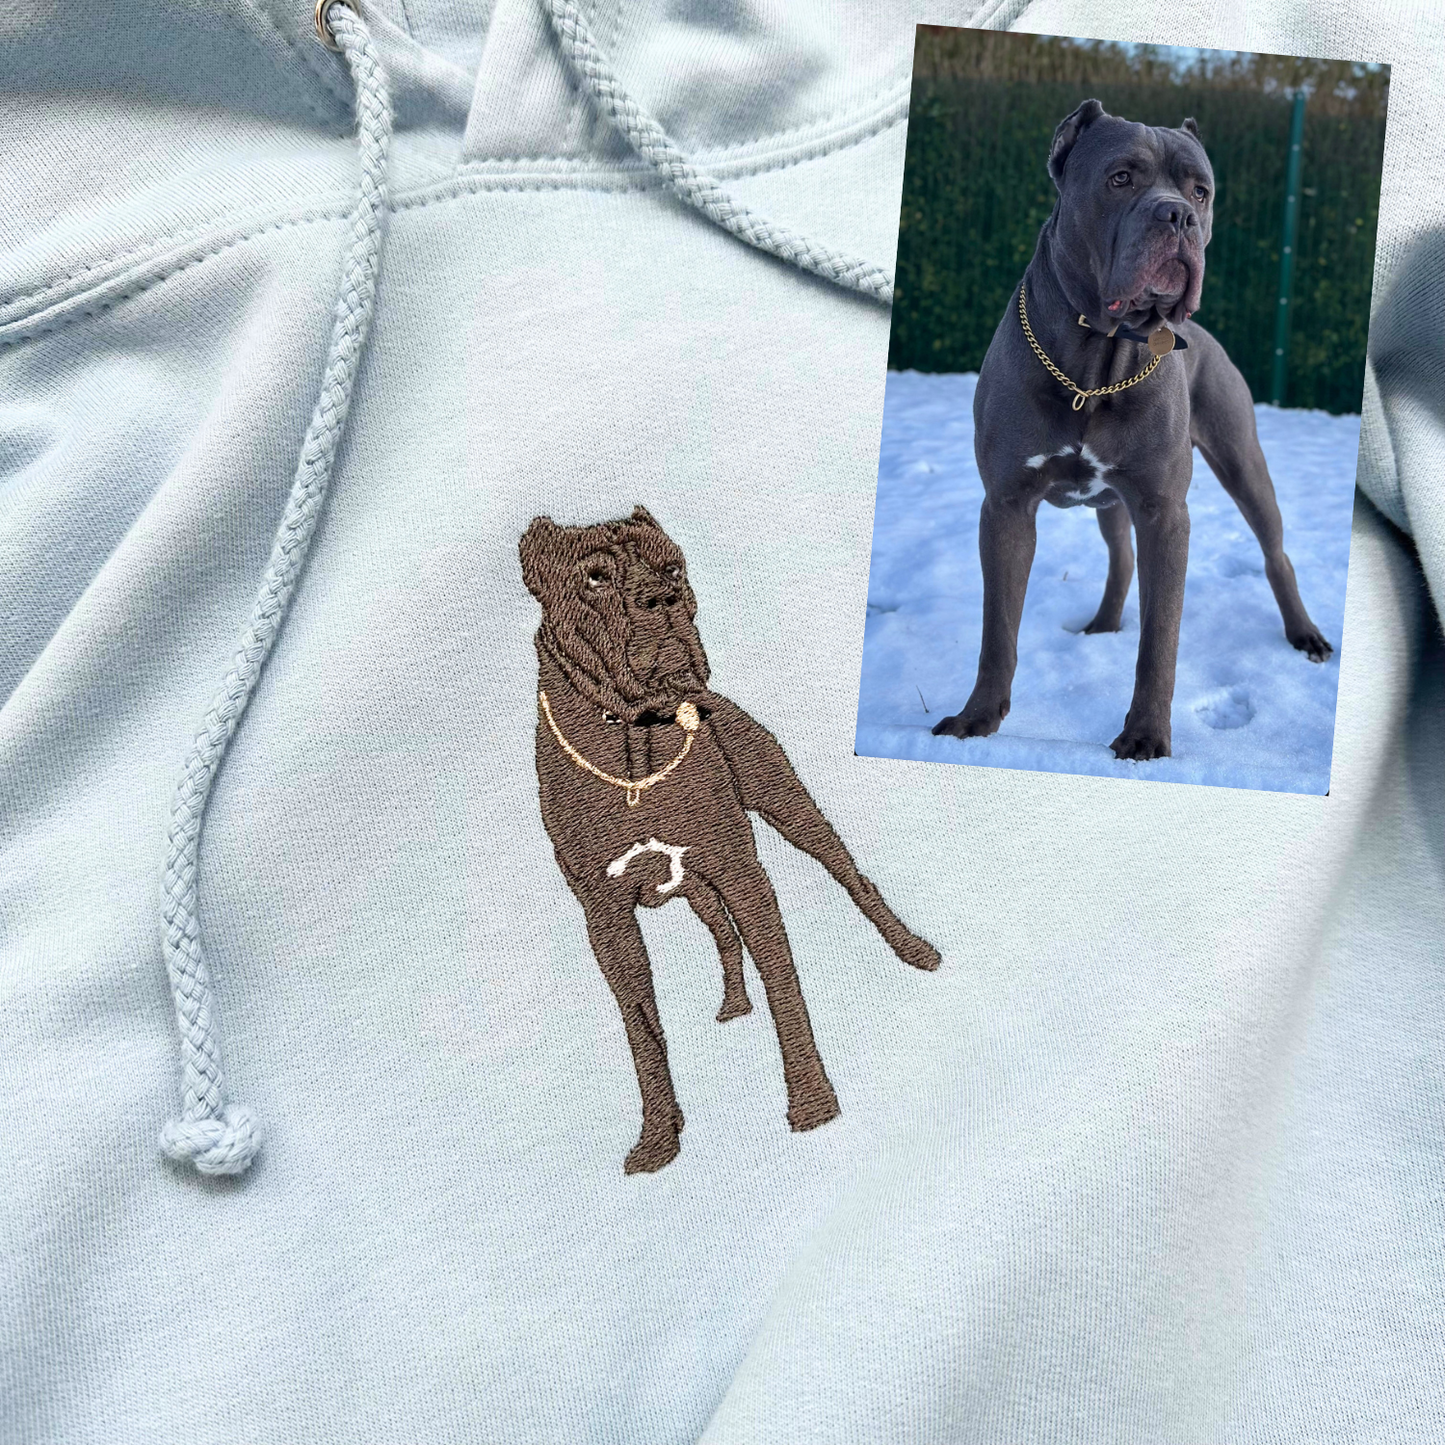 Personalised Pet Portrait Hoodie with Intricate Embroidery - This stunning hoodie showcases a lifelike embroidered portrait of your furry friend. Expertly crafted with attention to detail and shading, the image captures your pet's unique personality, making it a cherished keepsake for any pet owner. Made with high-quality materials, this hoodie is not only beautiful and sentimental but also comfortable and practical. Wear your pet's likeness close to your heart with this personalised pet portrait hoodie.